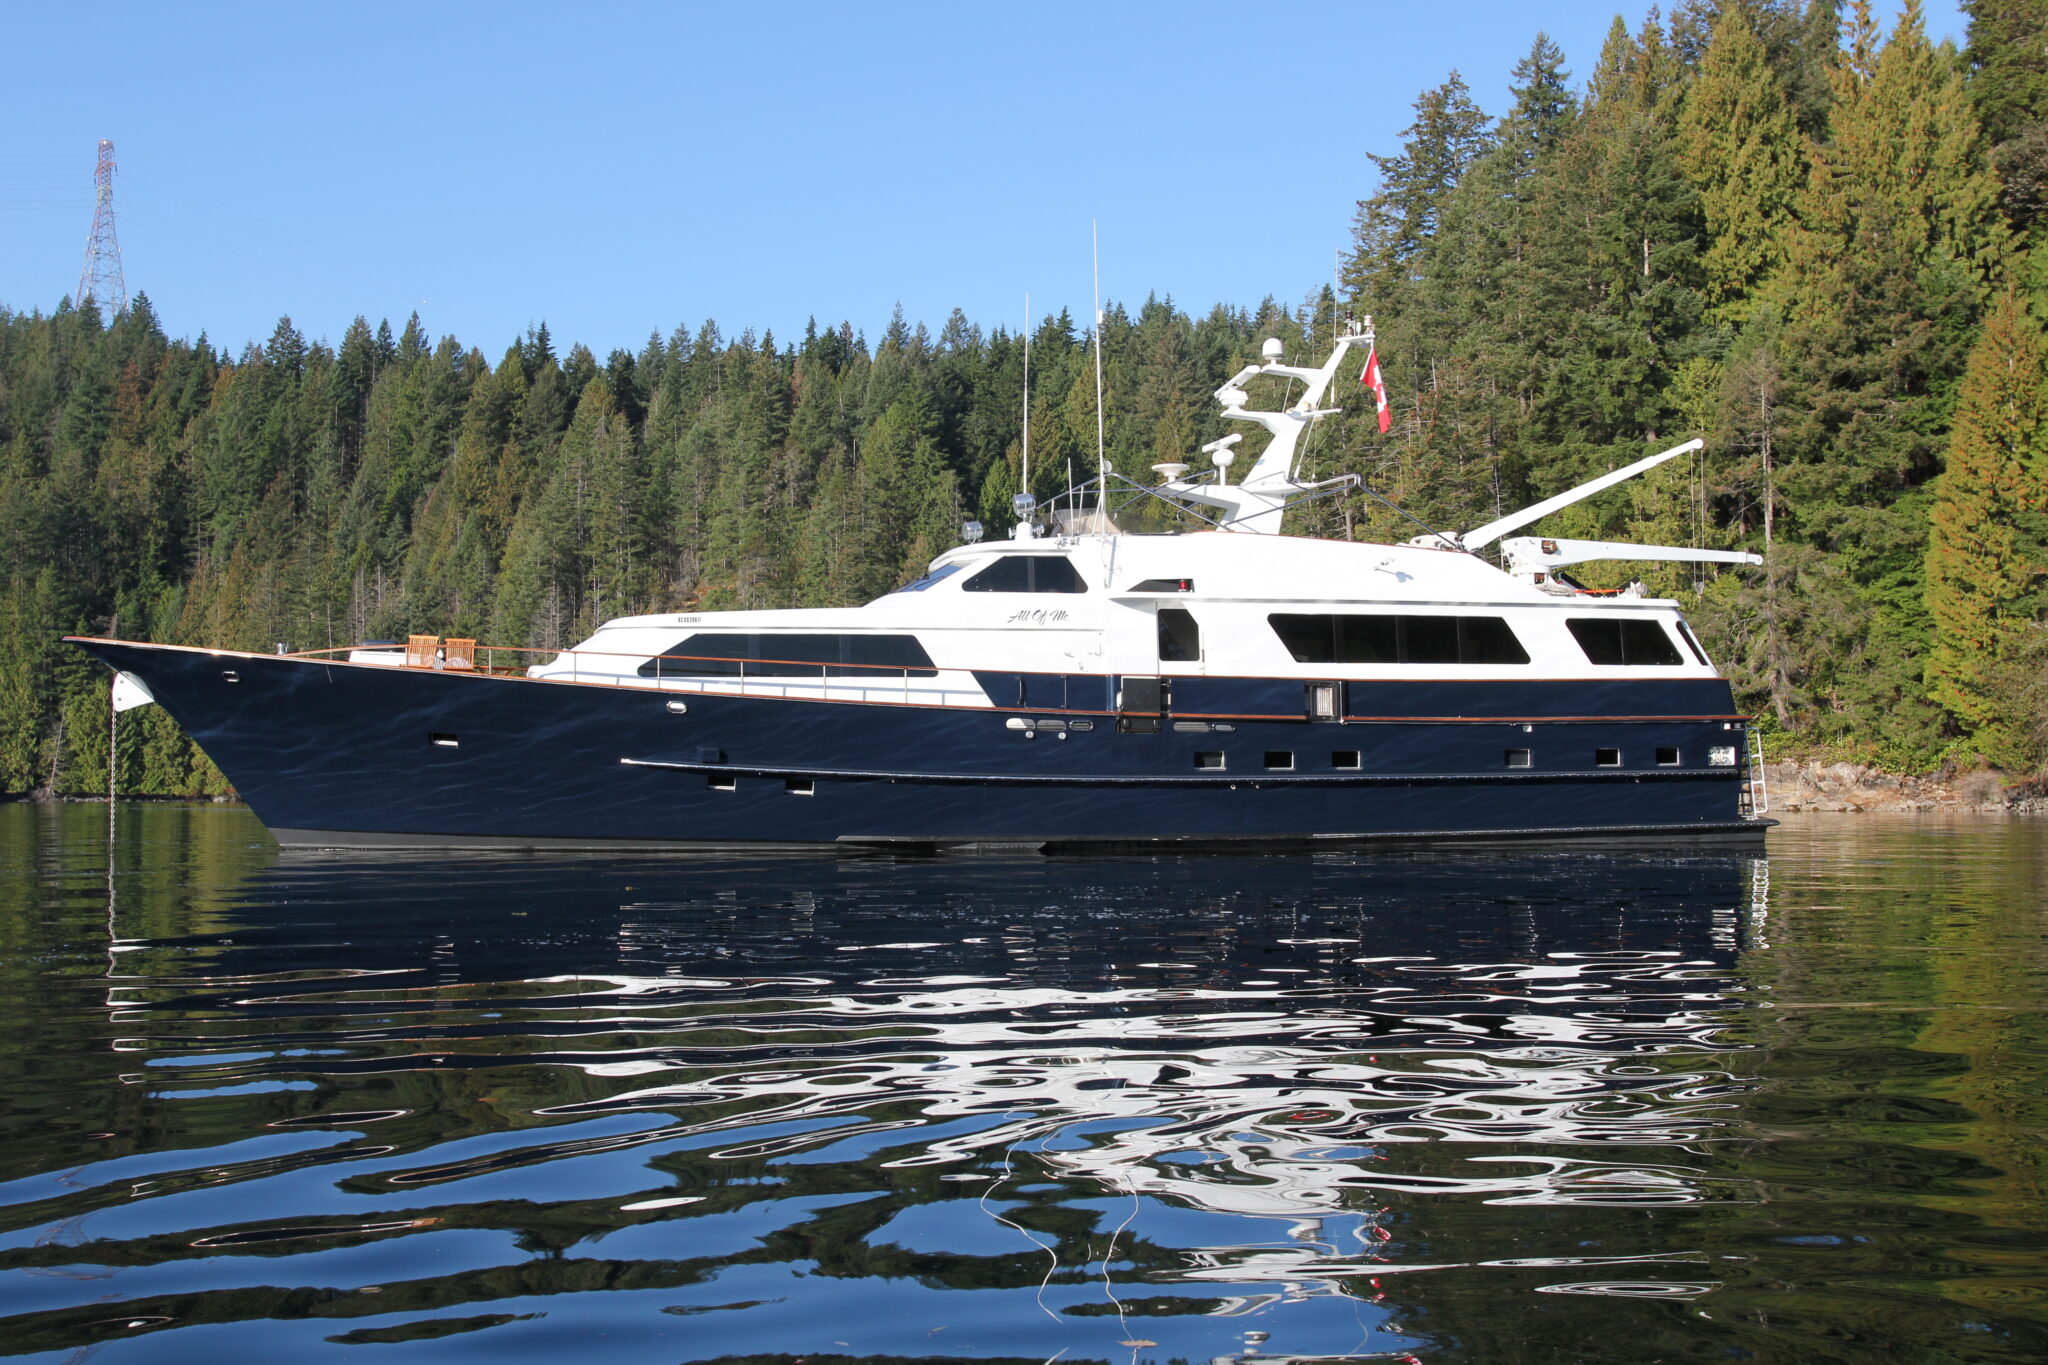 Exterior of All of Me, Vancouver's luxury superyacht. The yacht is in the foreground with a beautiful forest behind it.